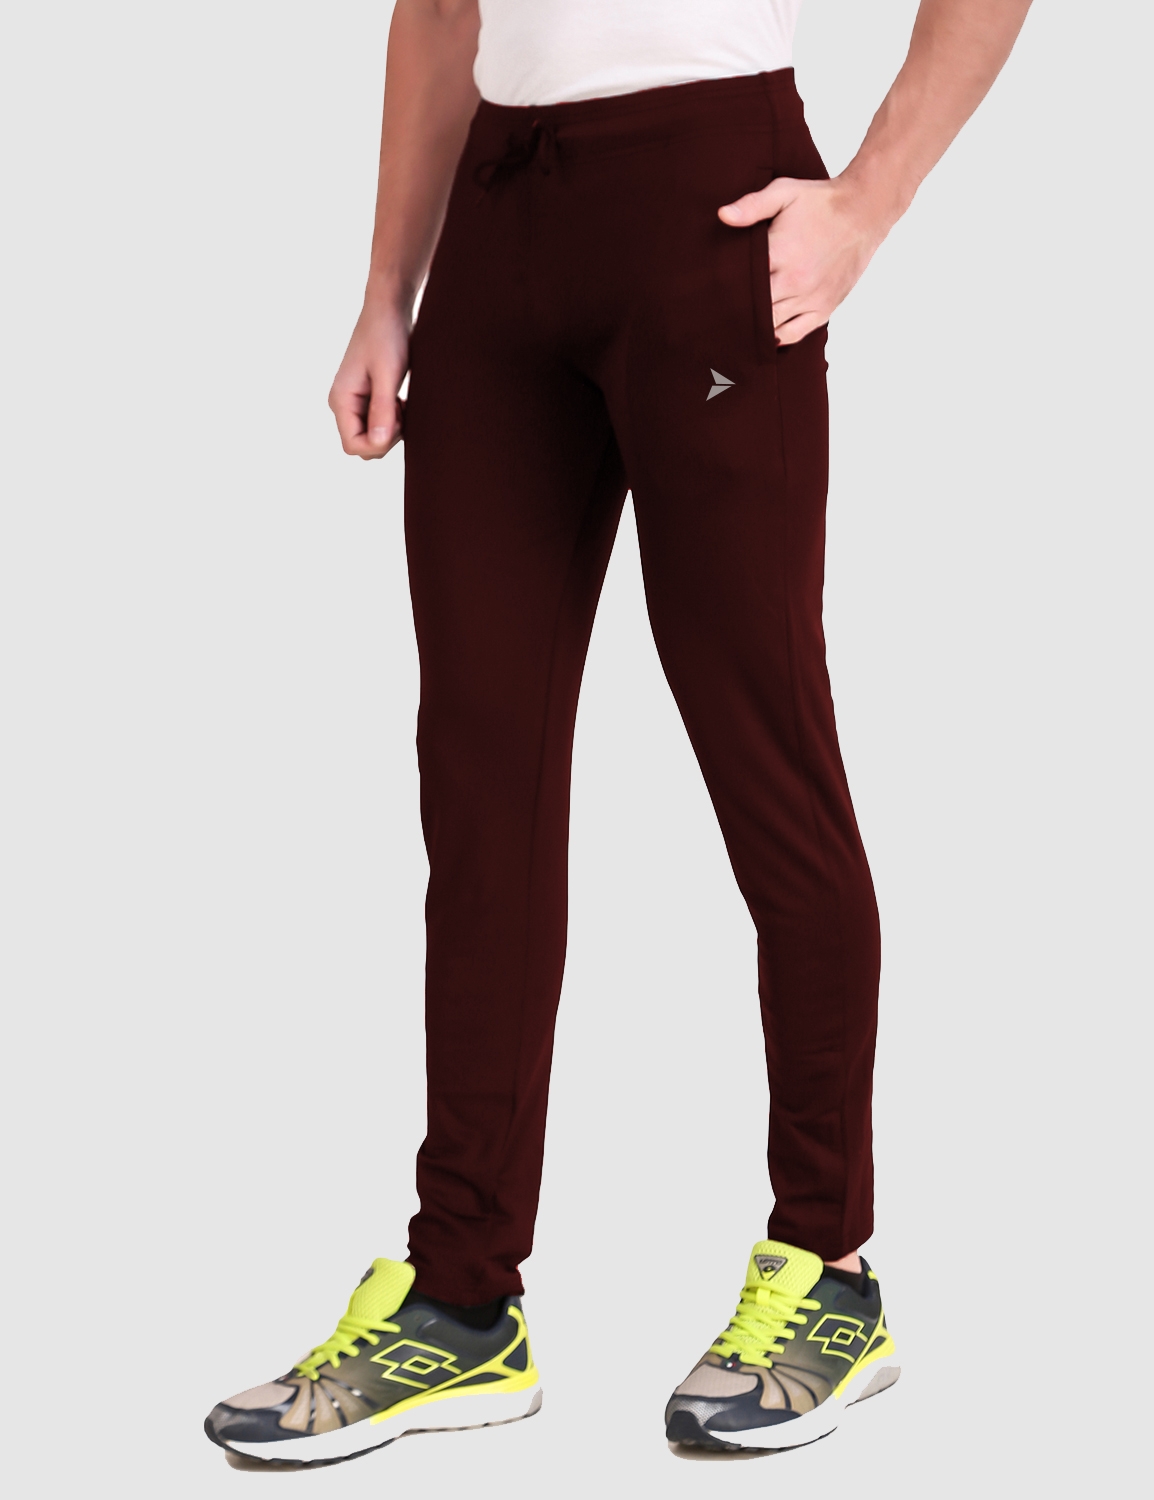 Fitinc | Fitinc Slim Fit Maroon Track Pant for Workout